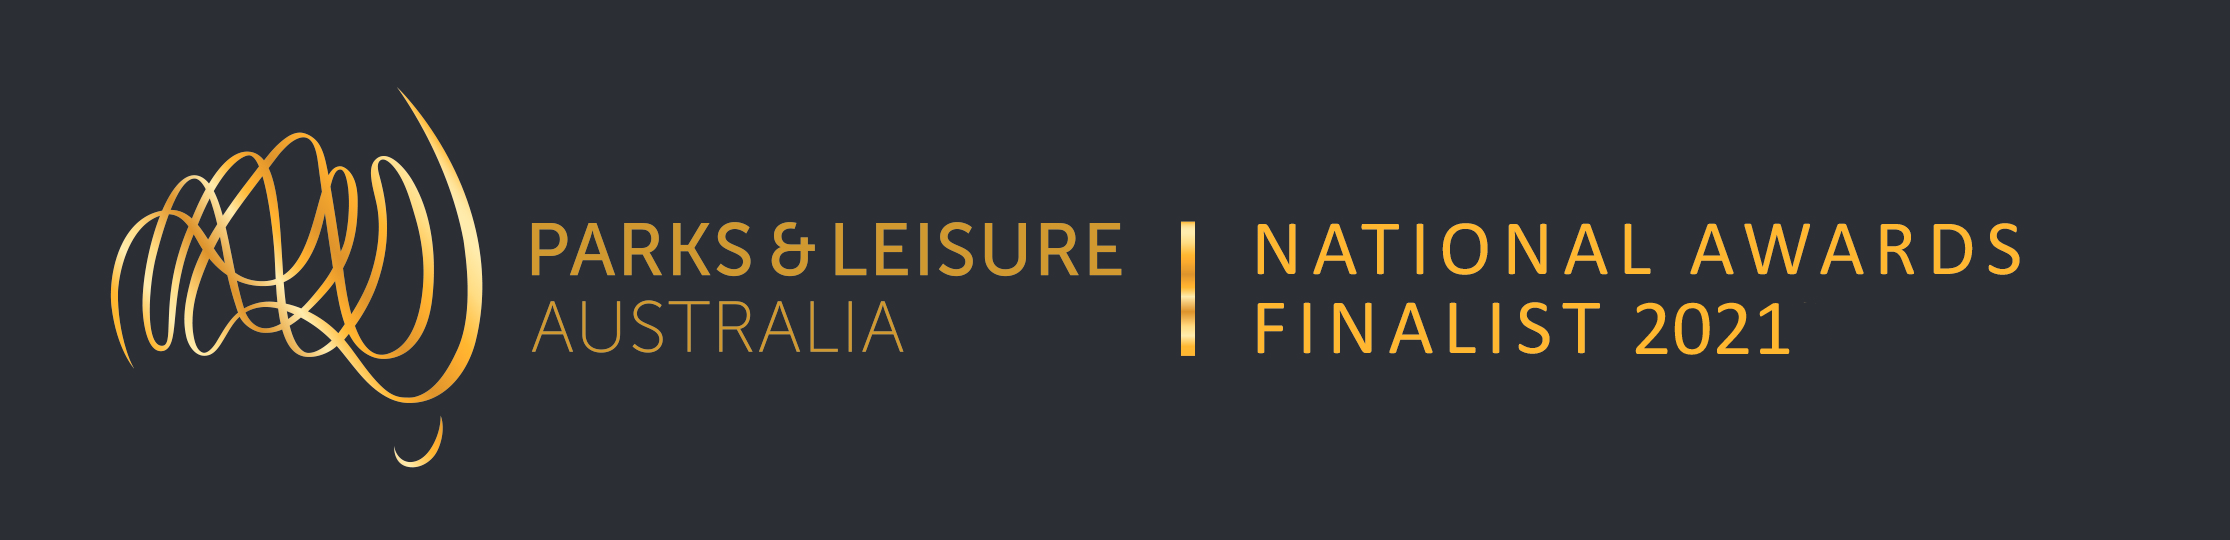 Parks and Leisure Australia - National Awards Finalist 2021